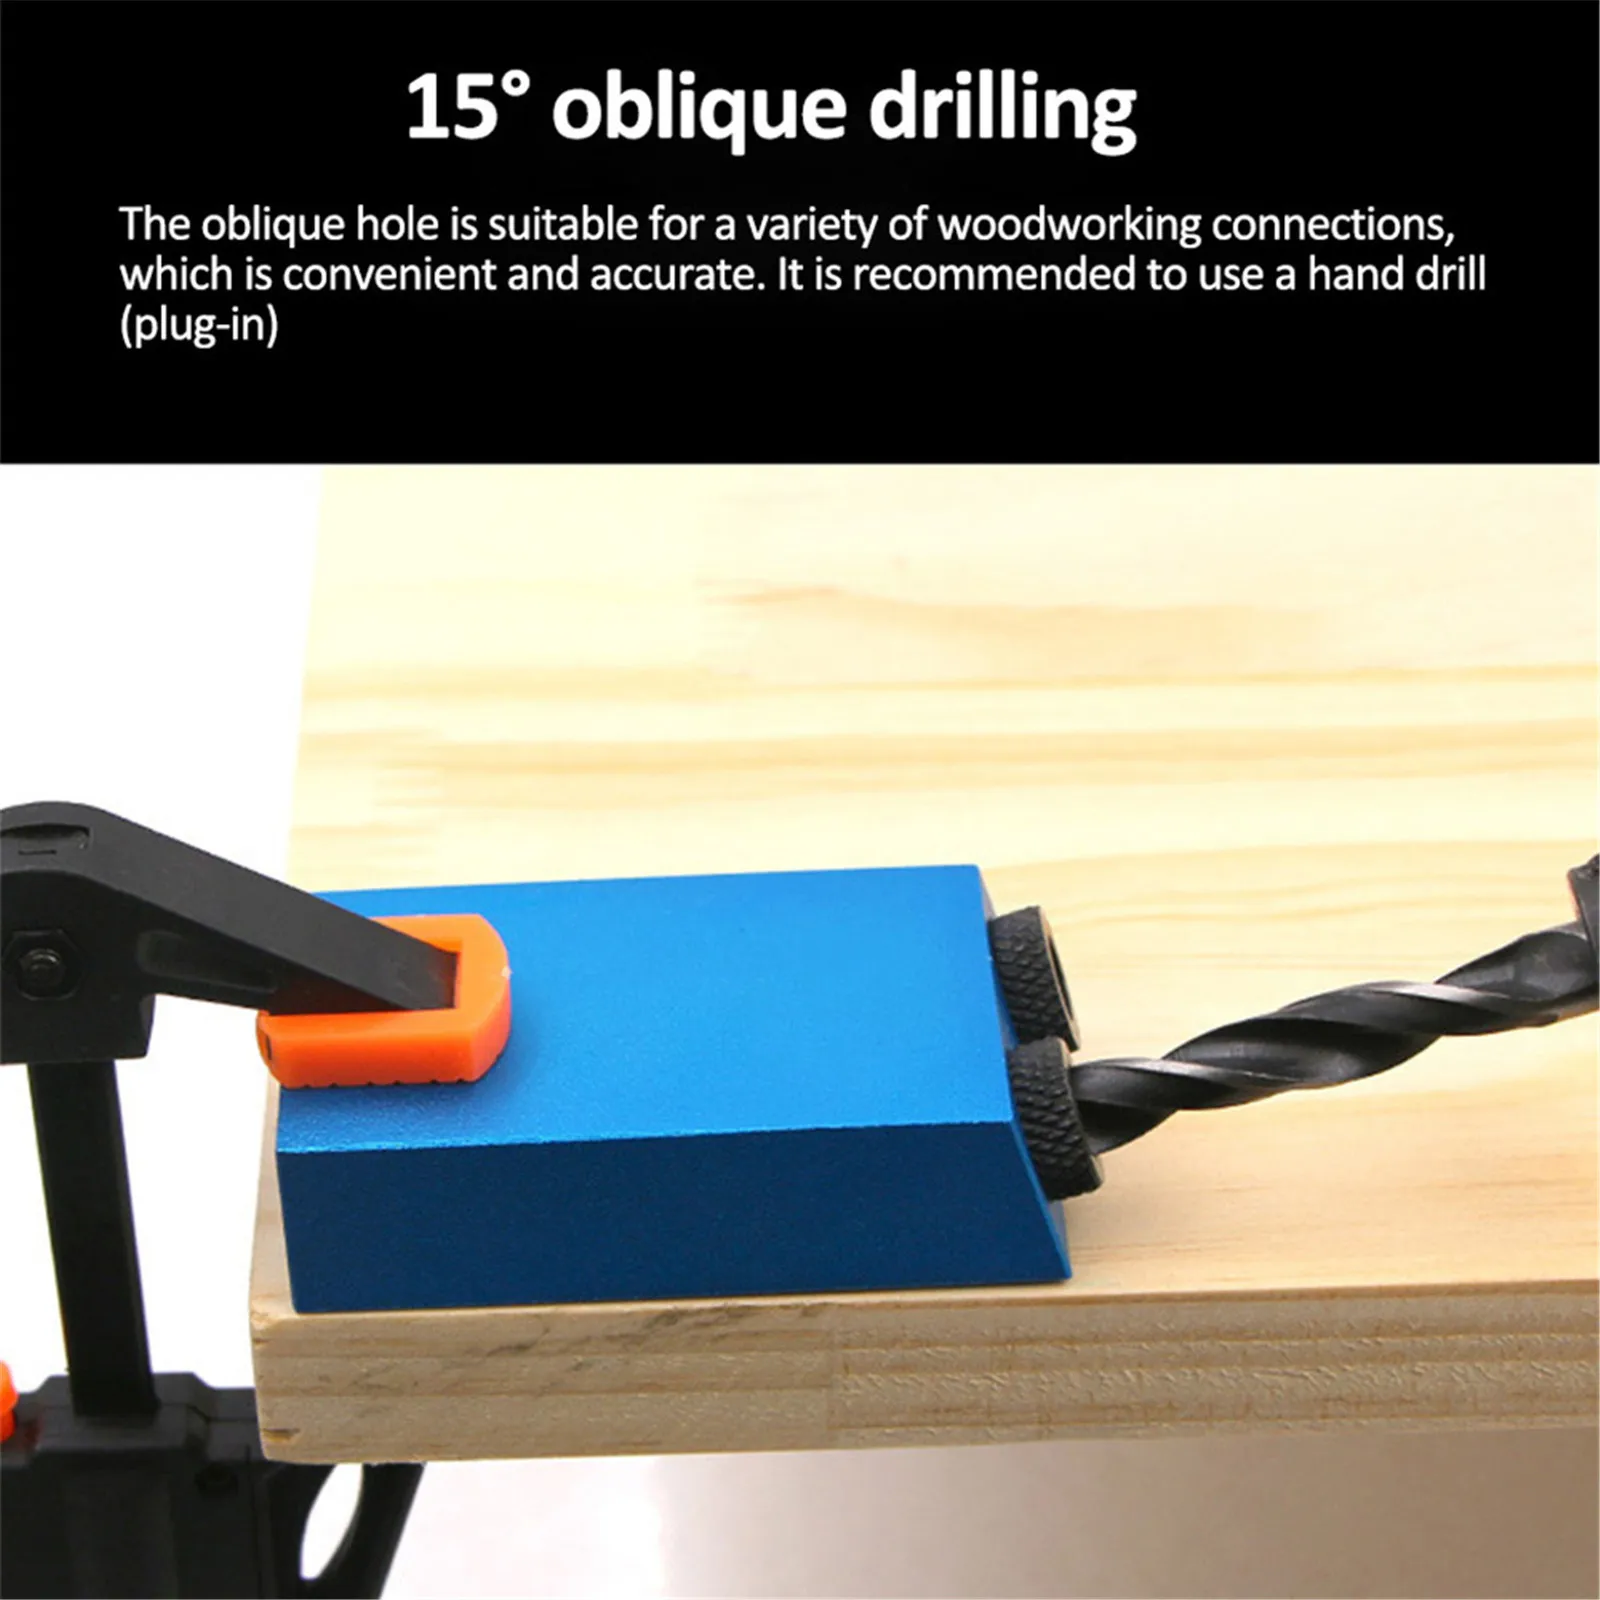 15 Degrees Hole Jig Kit Woodworking Hole Punch Locator Hole Puncher Locator Jig Woodworking Tool 6 8 10mm woodworking drill guide locator hole puncher self centering scriber drill guide doweling jig carpentry tool hole opener